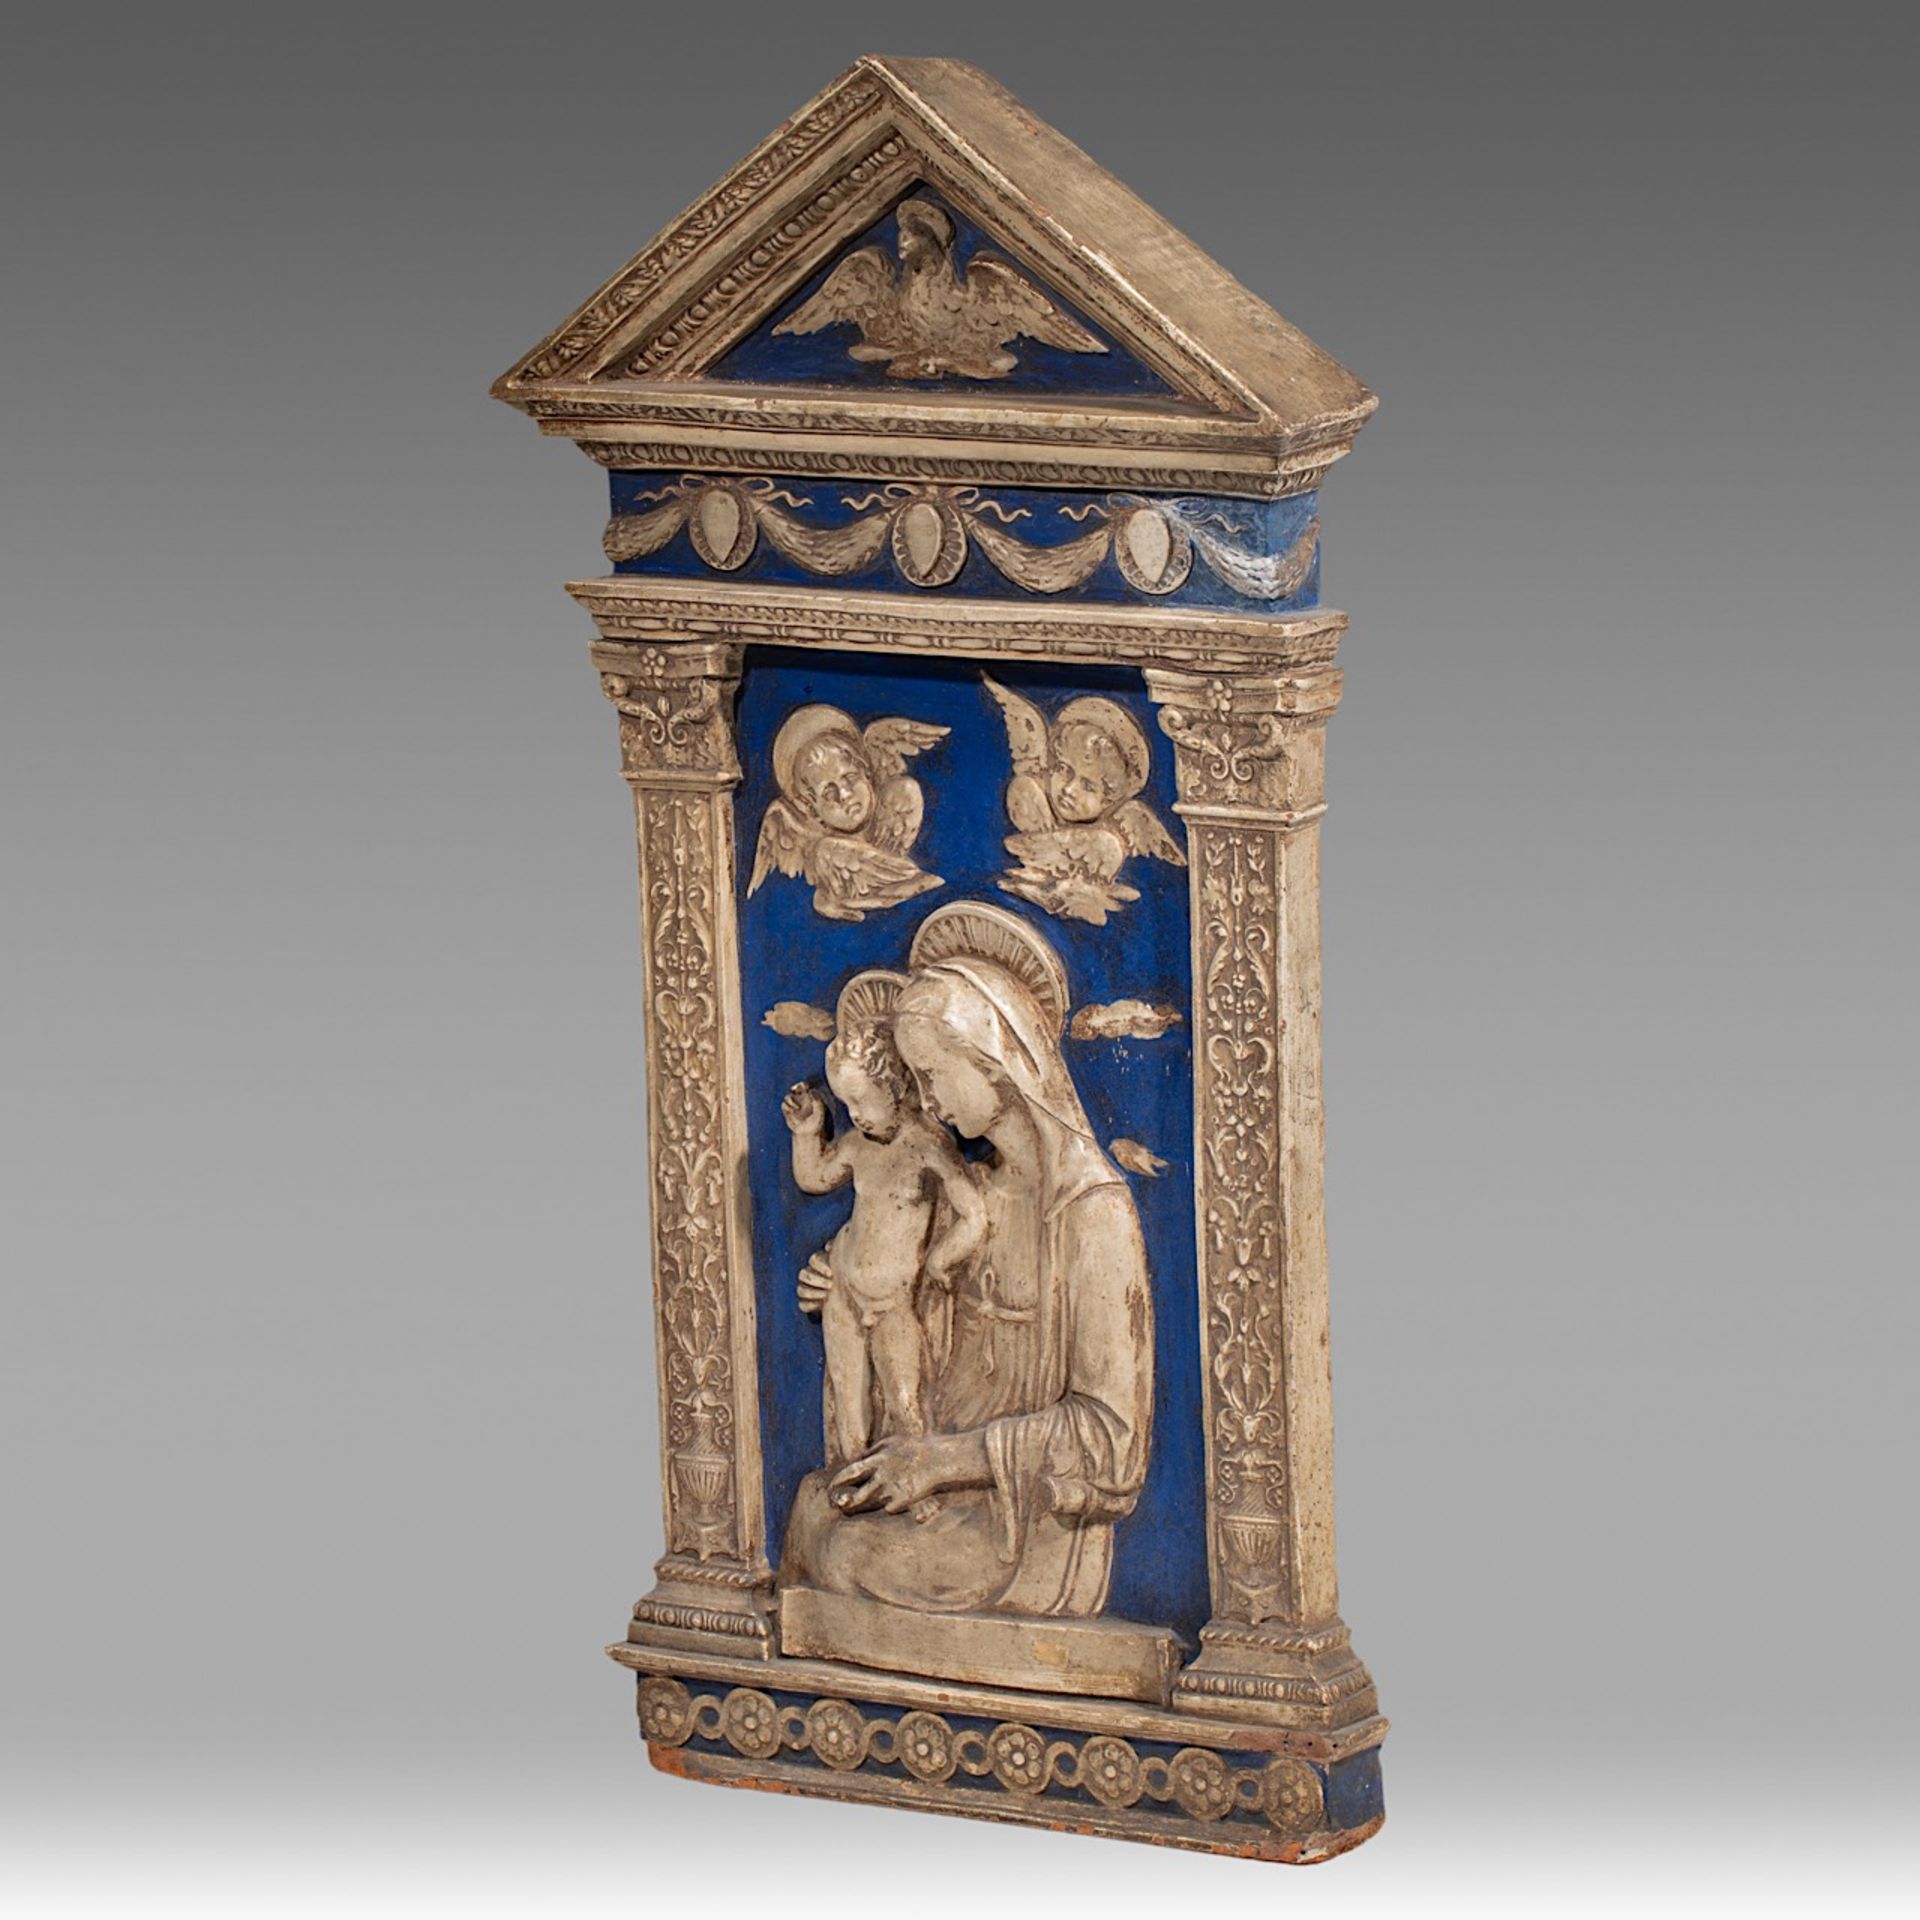 A blue and white glazed terracotta relief of the Virgin and Child in the Della Robbia manner or a fo - Image 4 of 6